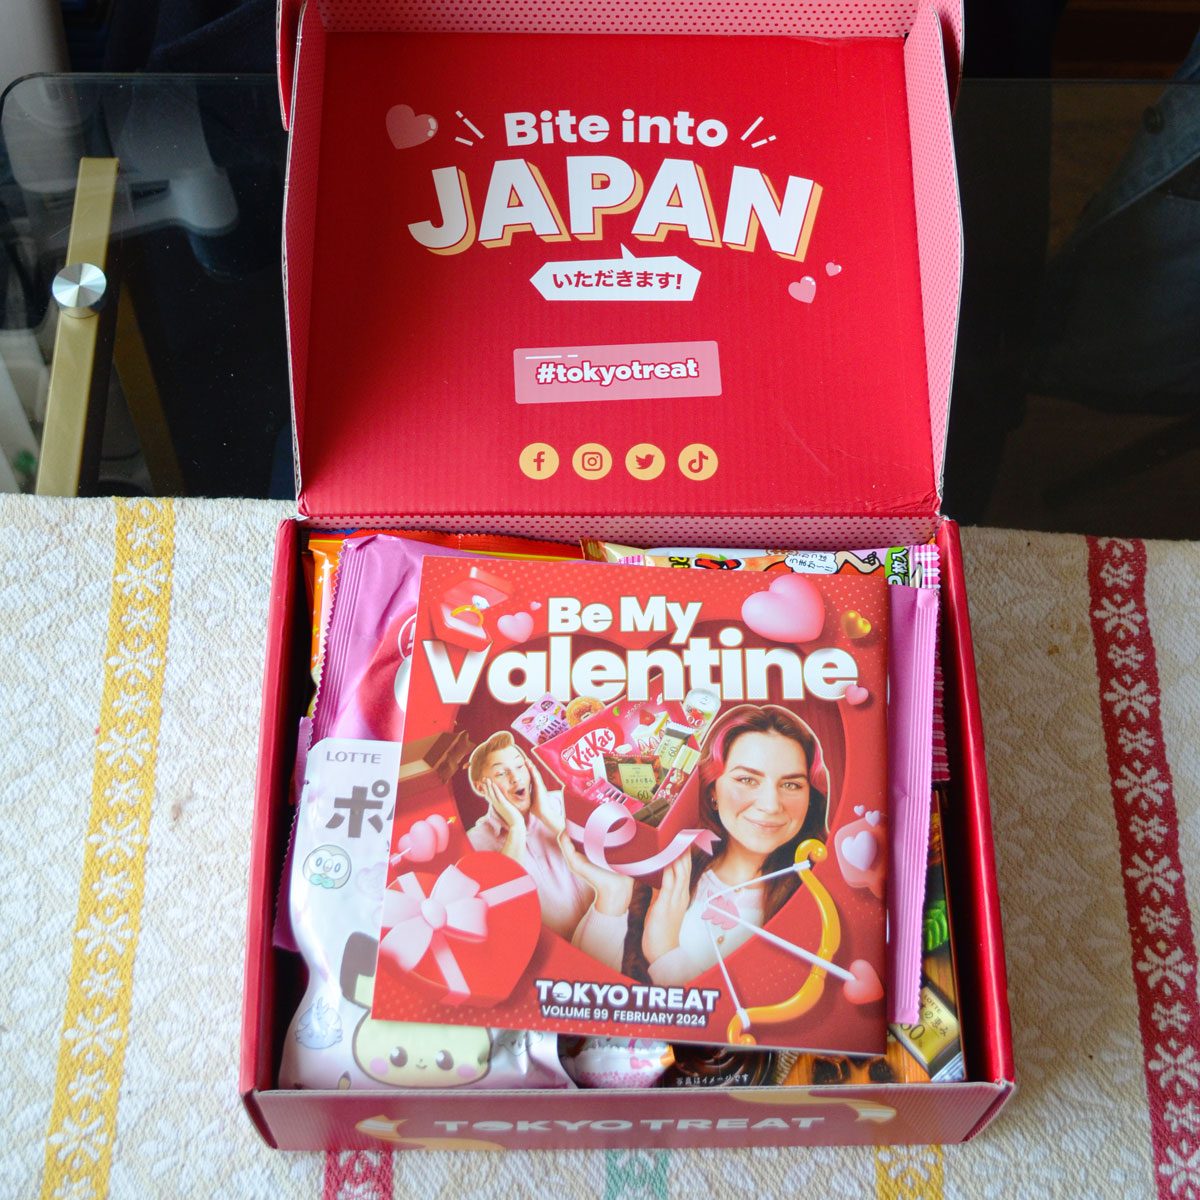 Tokyotreat box placed on a table